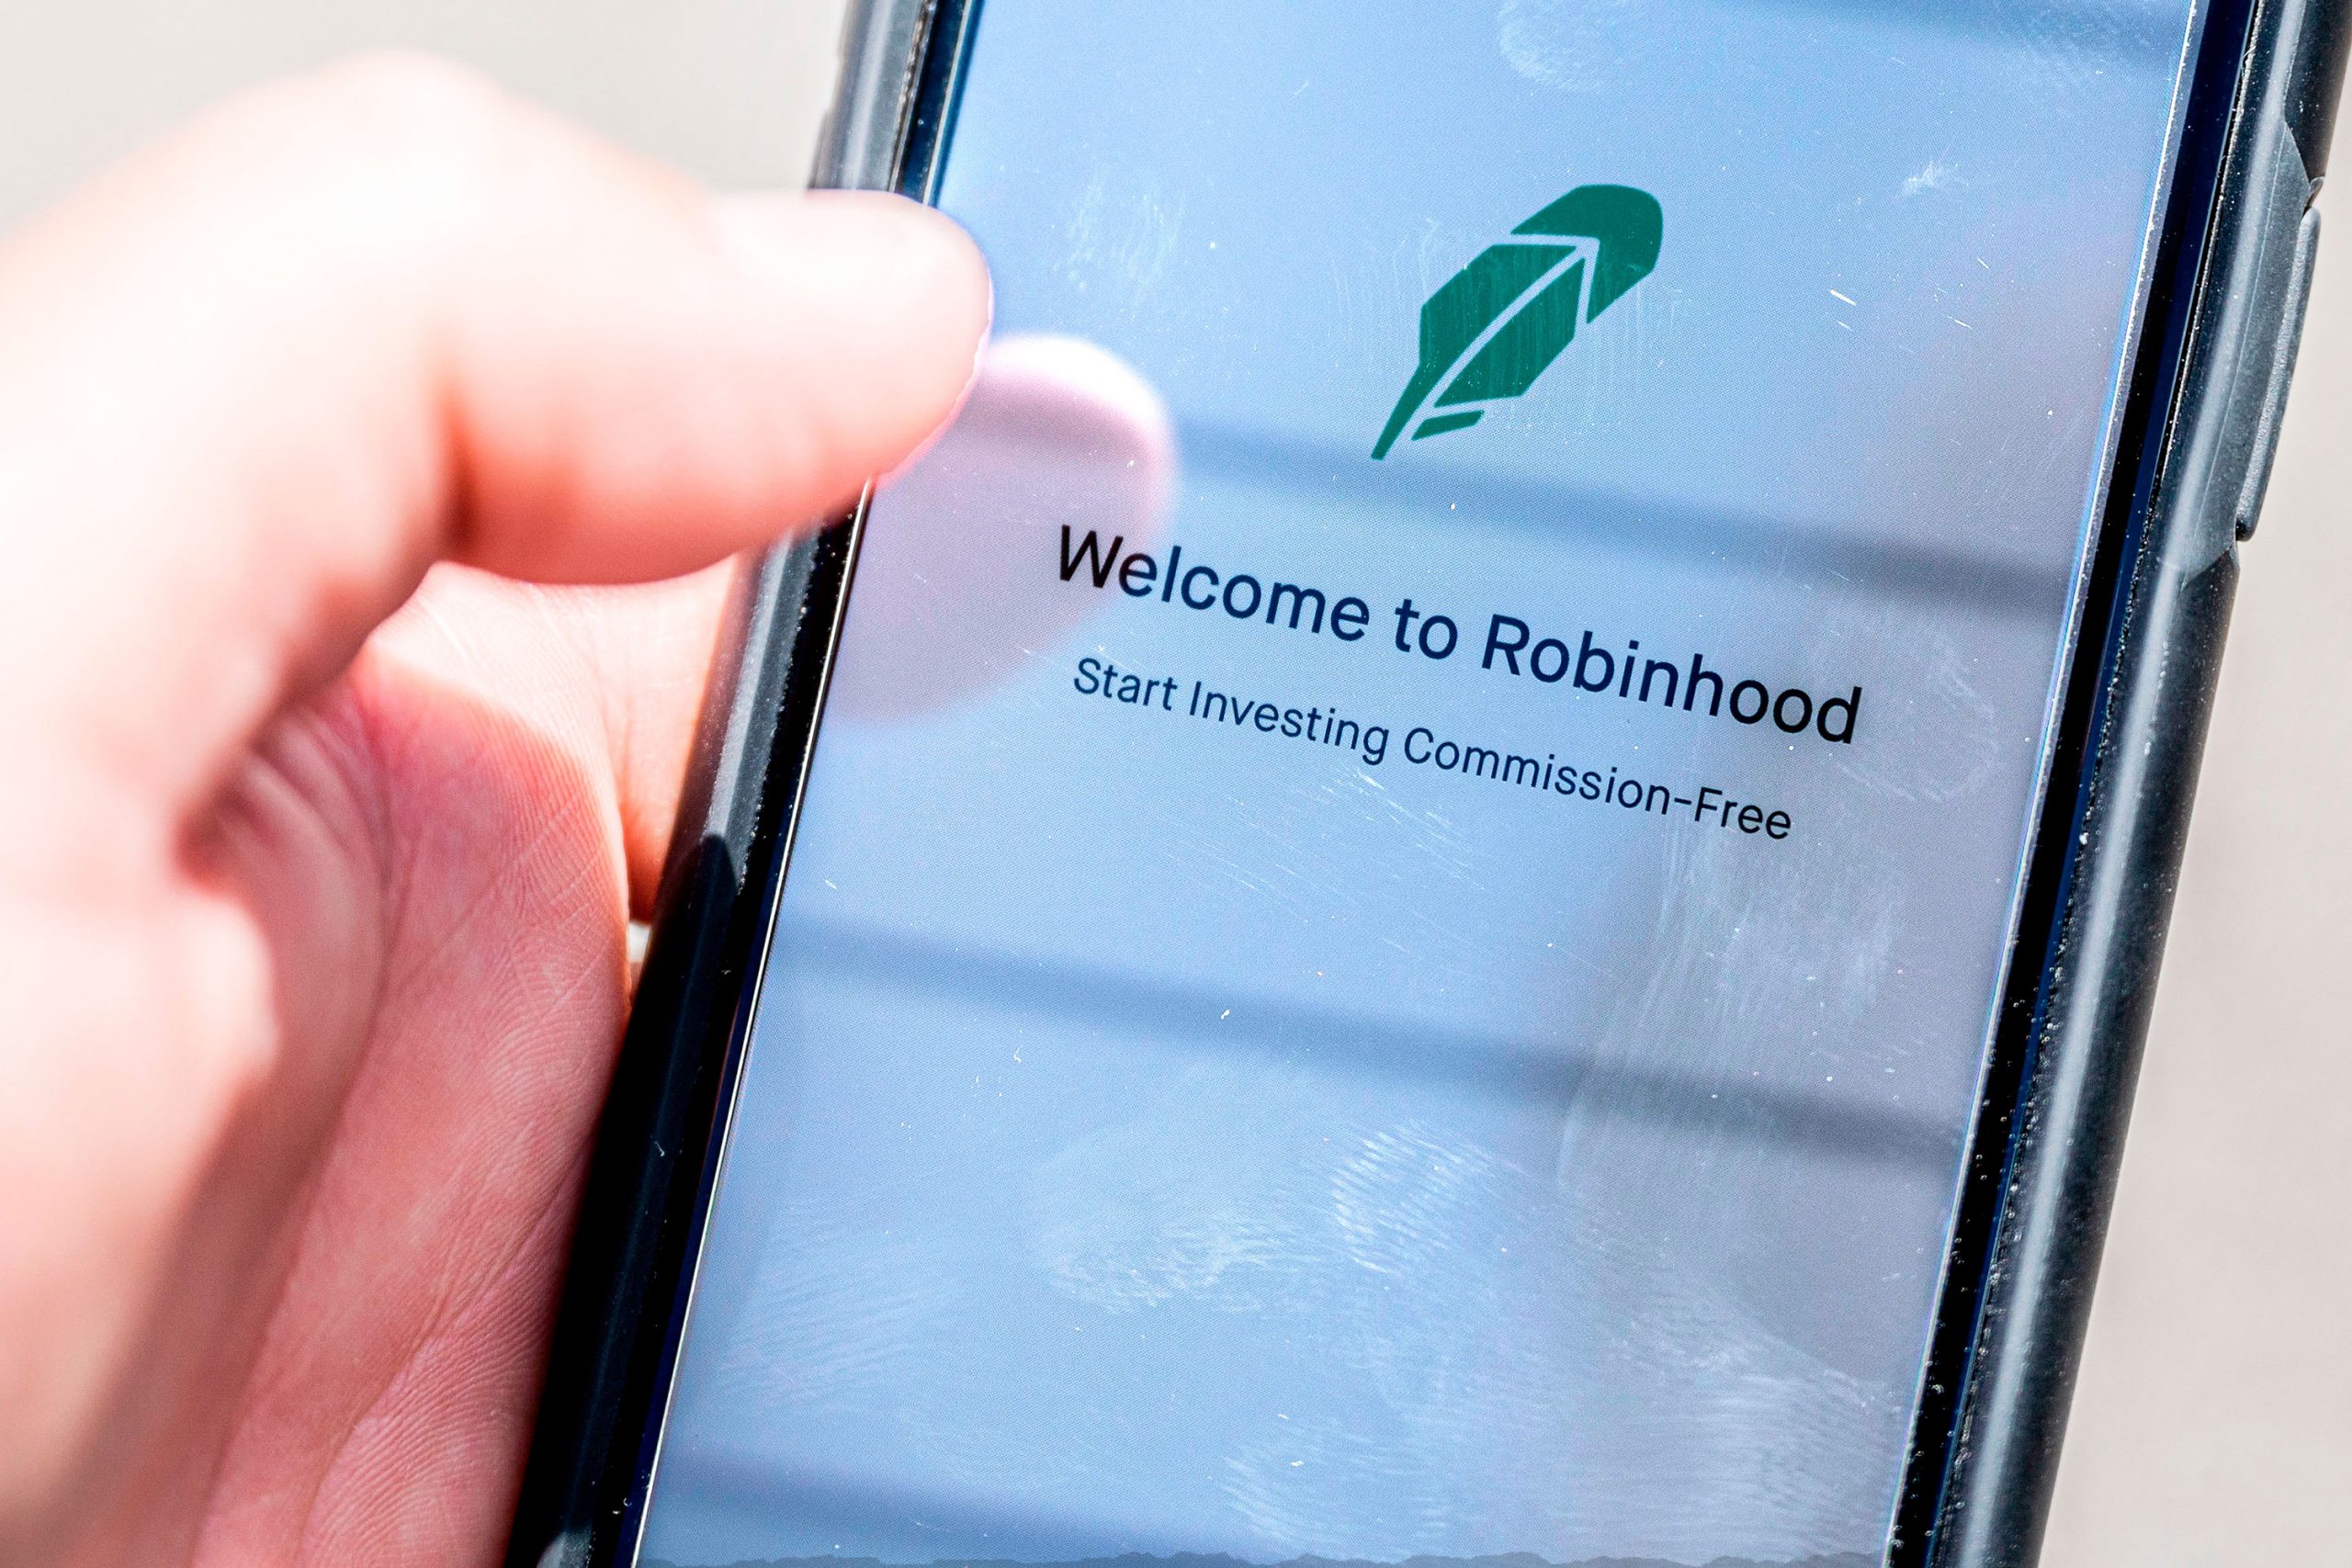 Robinhood traders helped stabilize the market in March rout: co-CEO